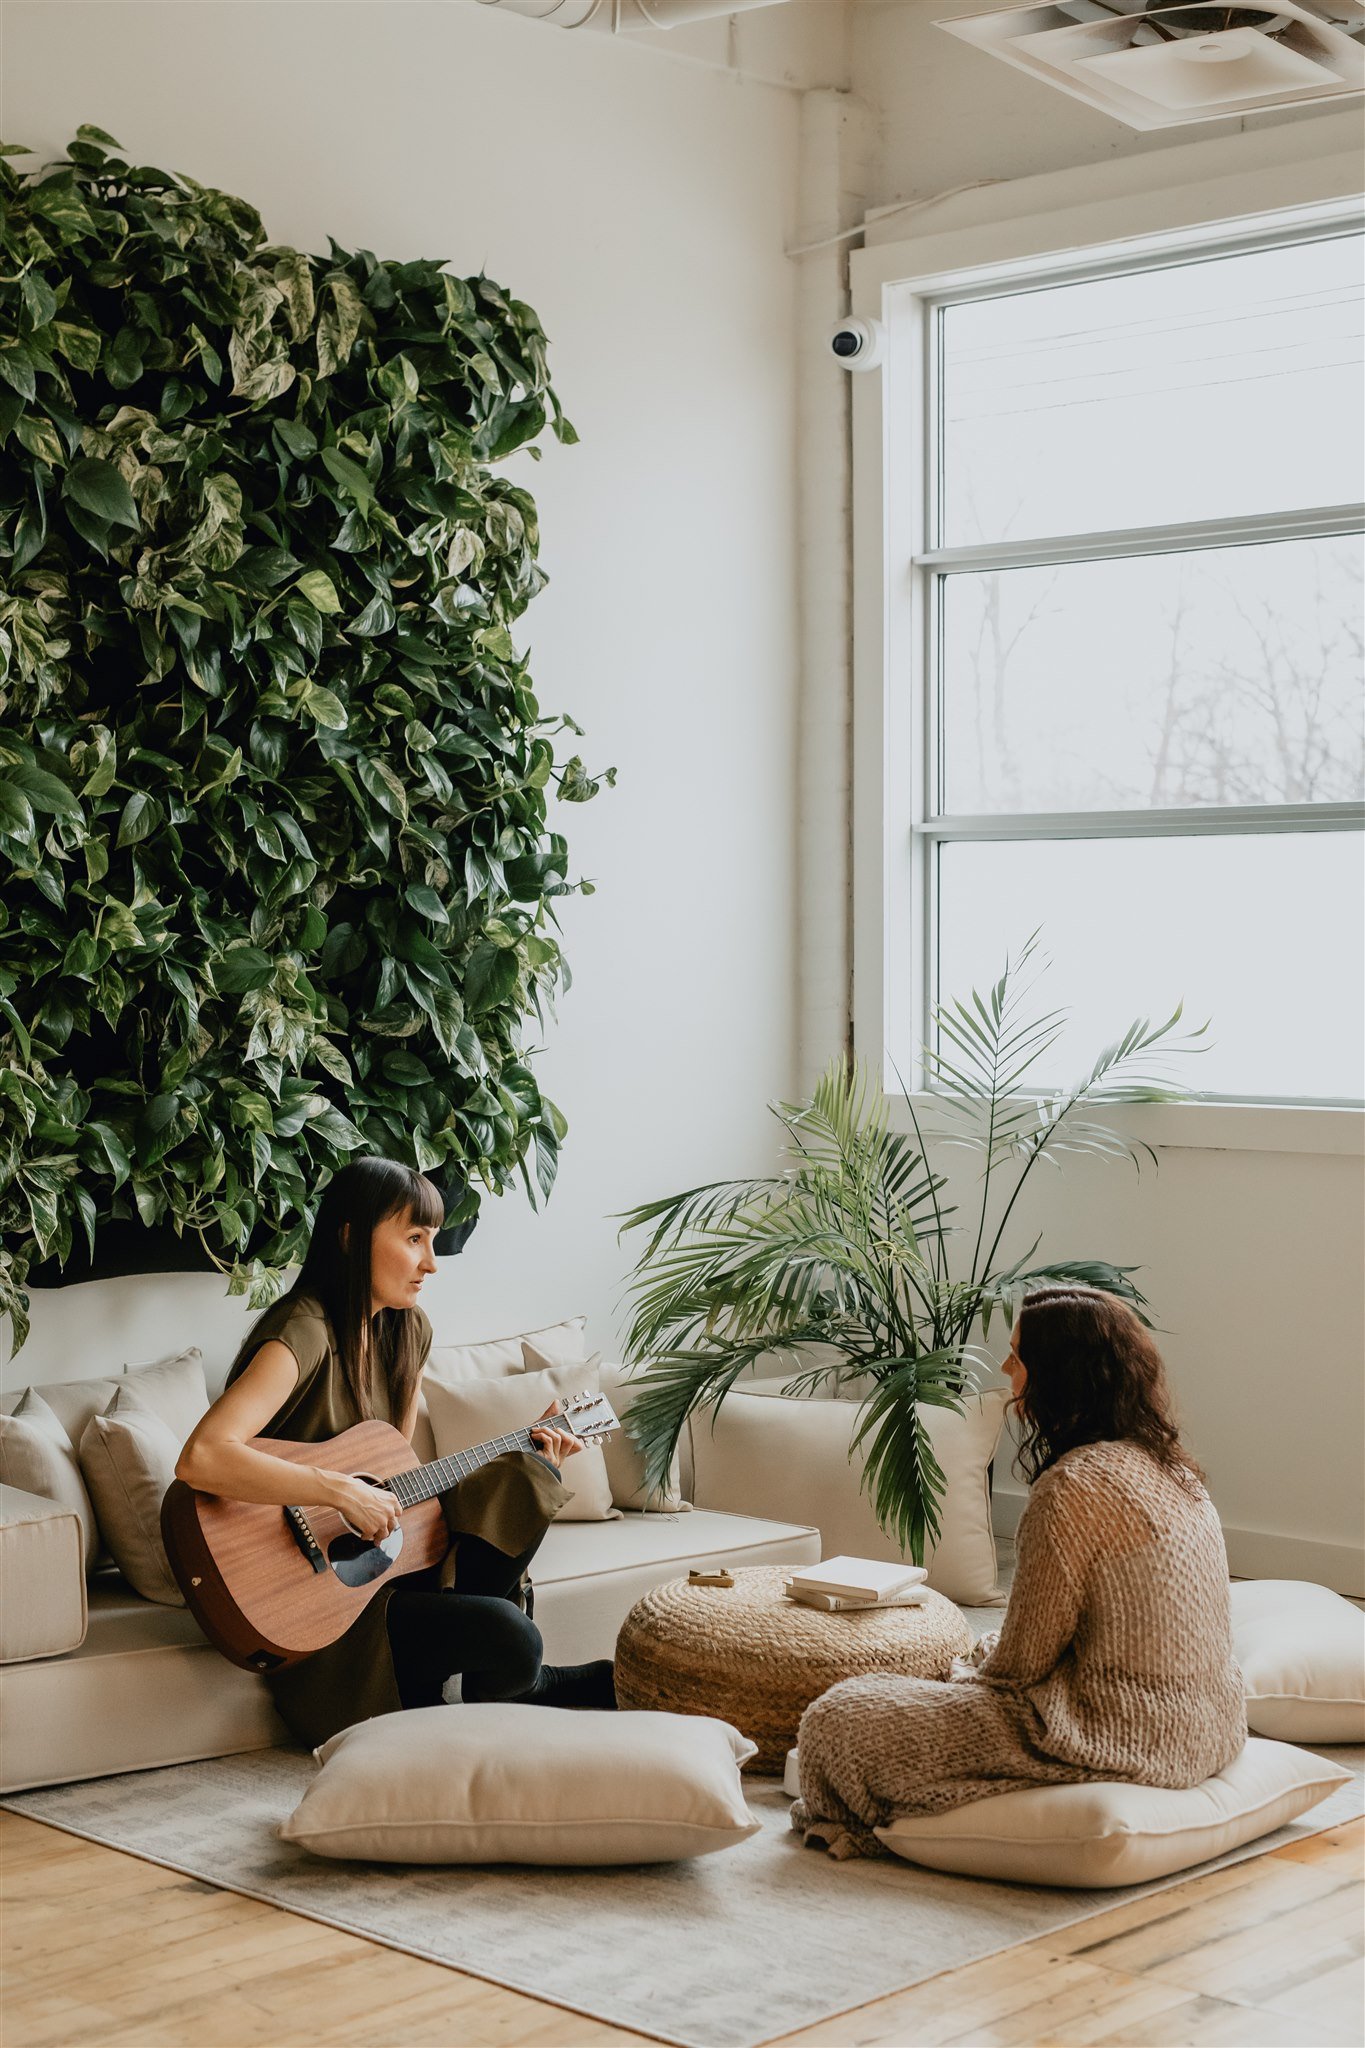 members-connecting-over-live-music-and-conversation-in-zen-space-at-&amp;asanas-the-collective-in-london-ontario